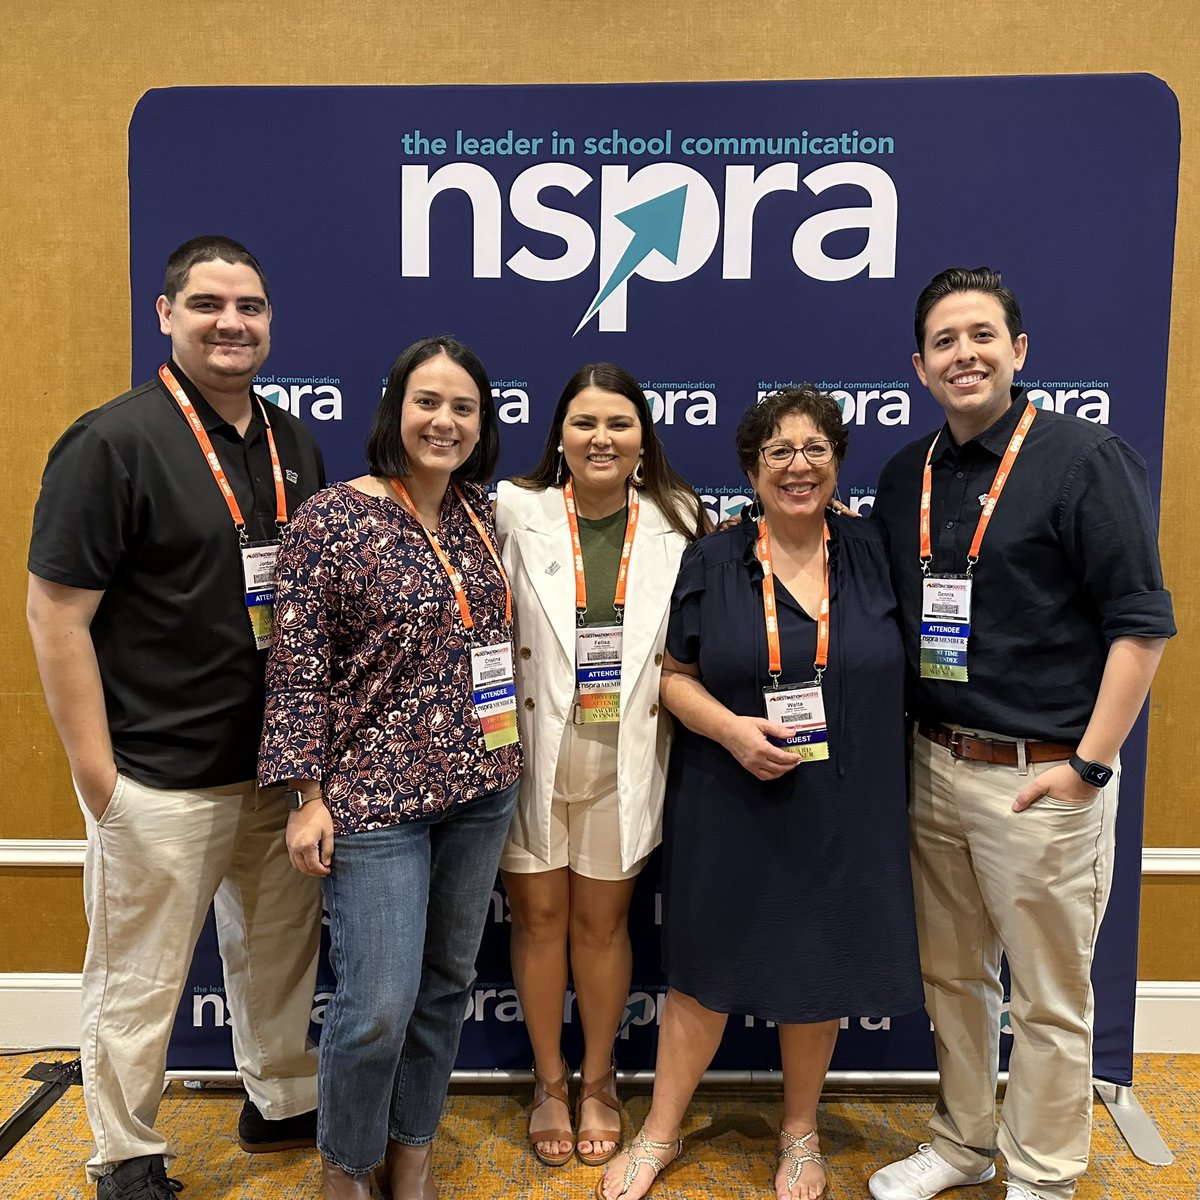 The @visaliausd communications team is ready for the @NSPRA conference! #NSPRA2023 #New2NSPRA